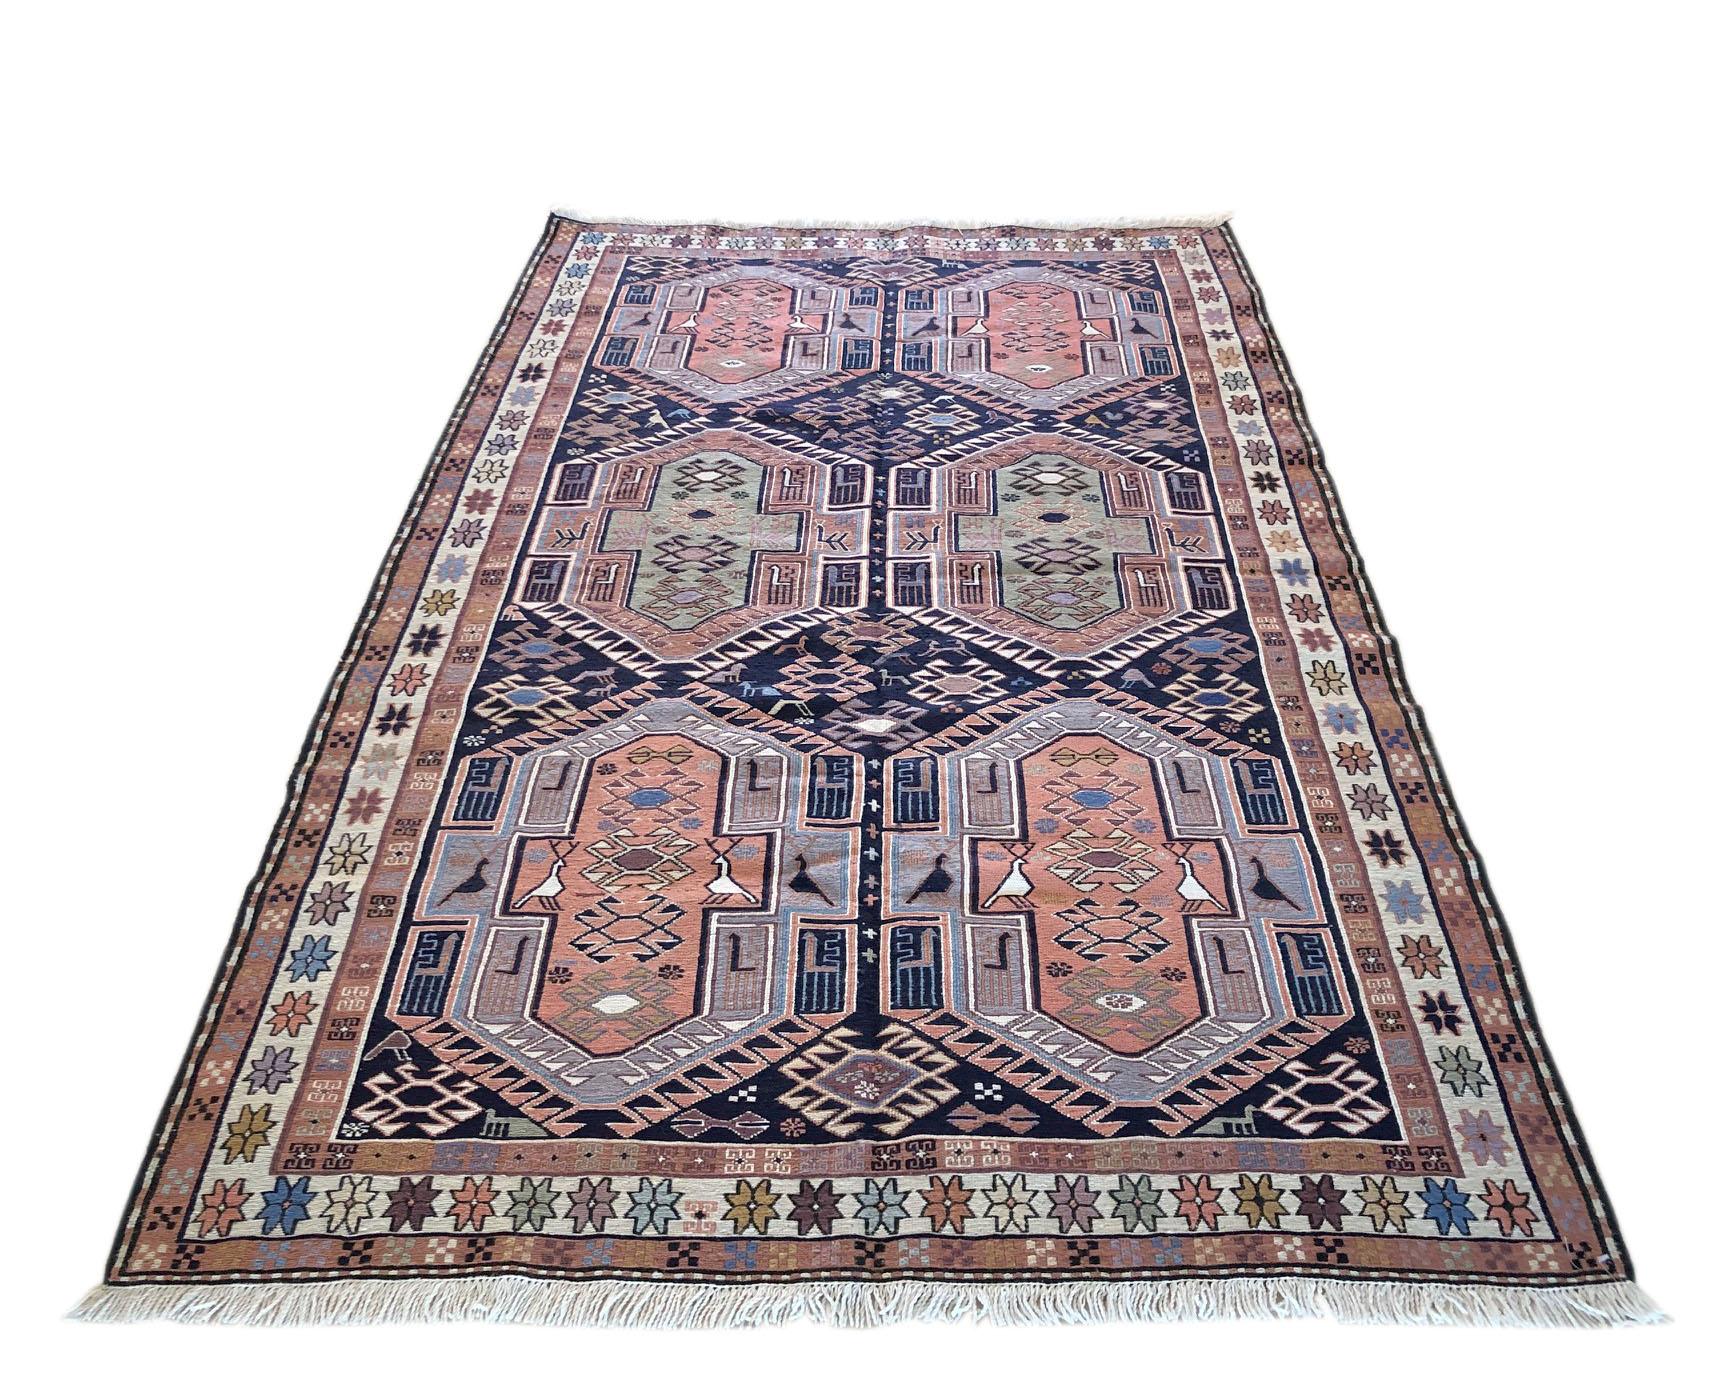 This rug is a Sumak rug which is a type of brocading or flat-woven pile. This is a flat-weave, rug that is thicker than the Kilim and very sturdy however they are not reversible like Kilims due to the non-clipped yarns are left on the back. The pile